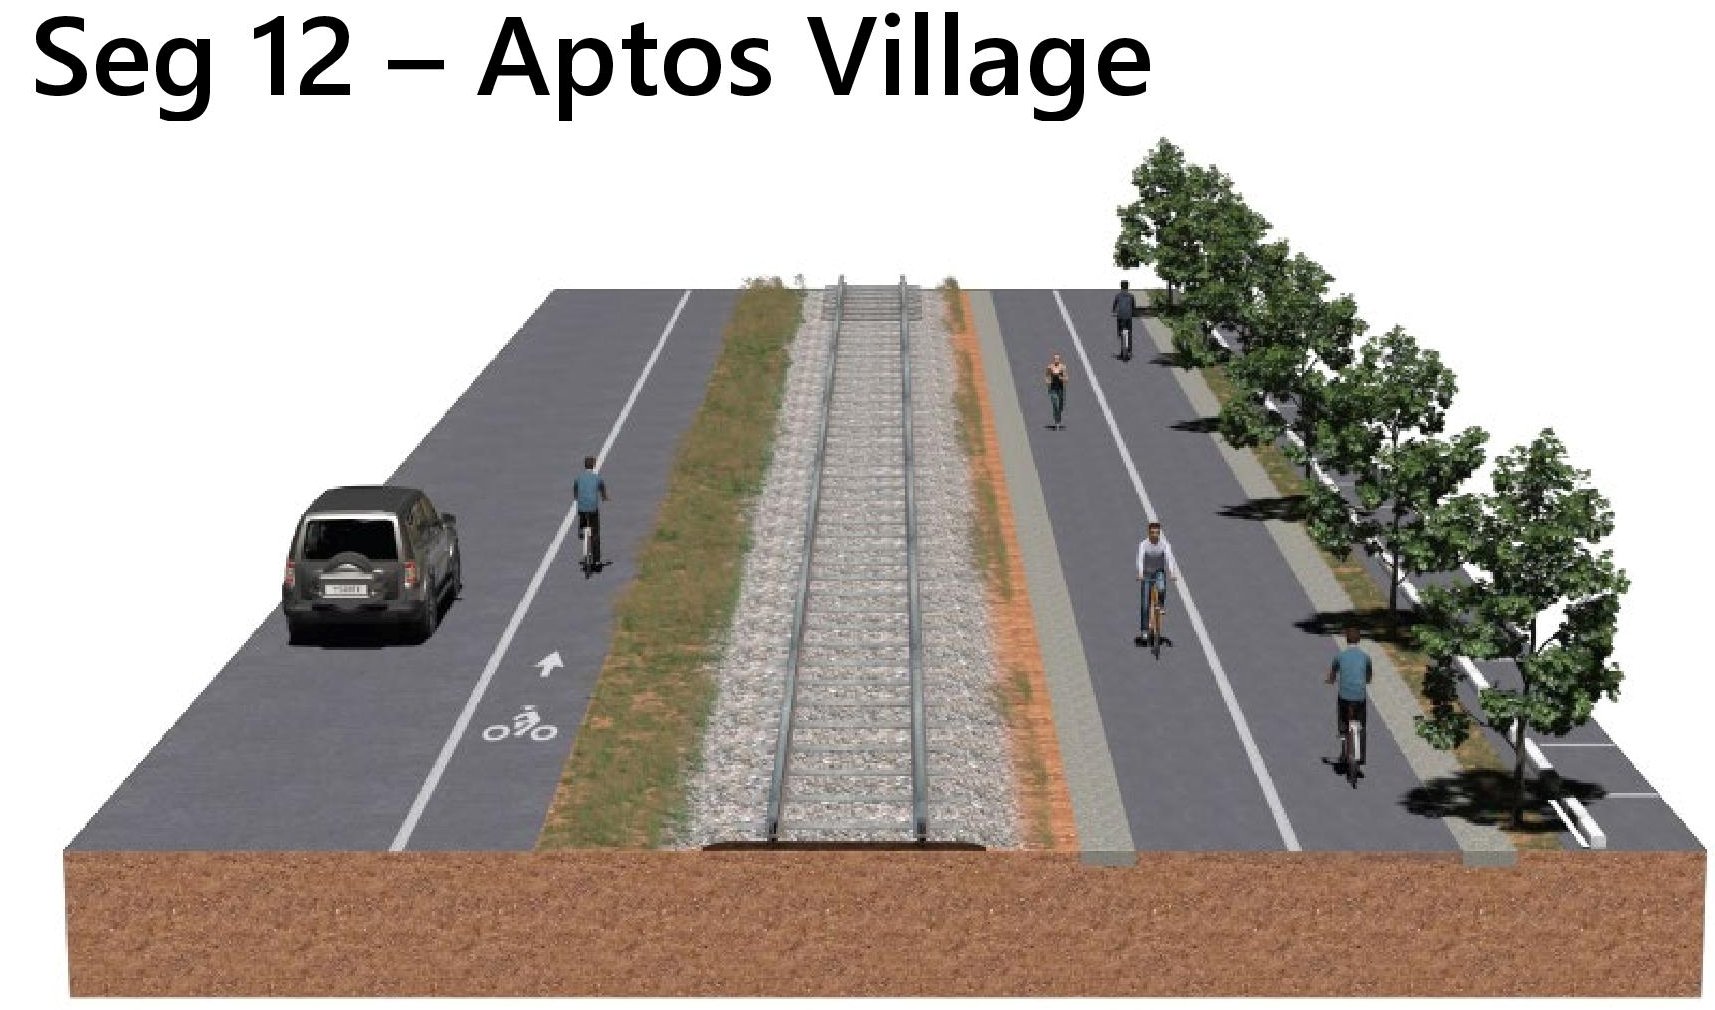 A paved path would run parallel to the train tracks in Aptos Village. (Santa Cruz County Regional Transportation Commission)